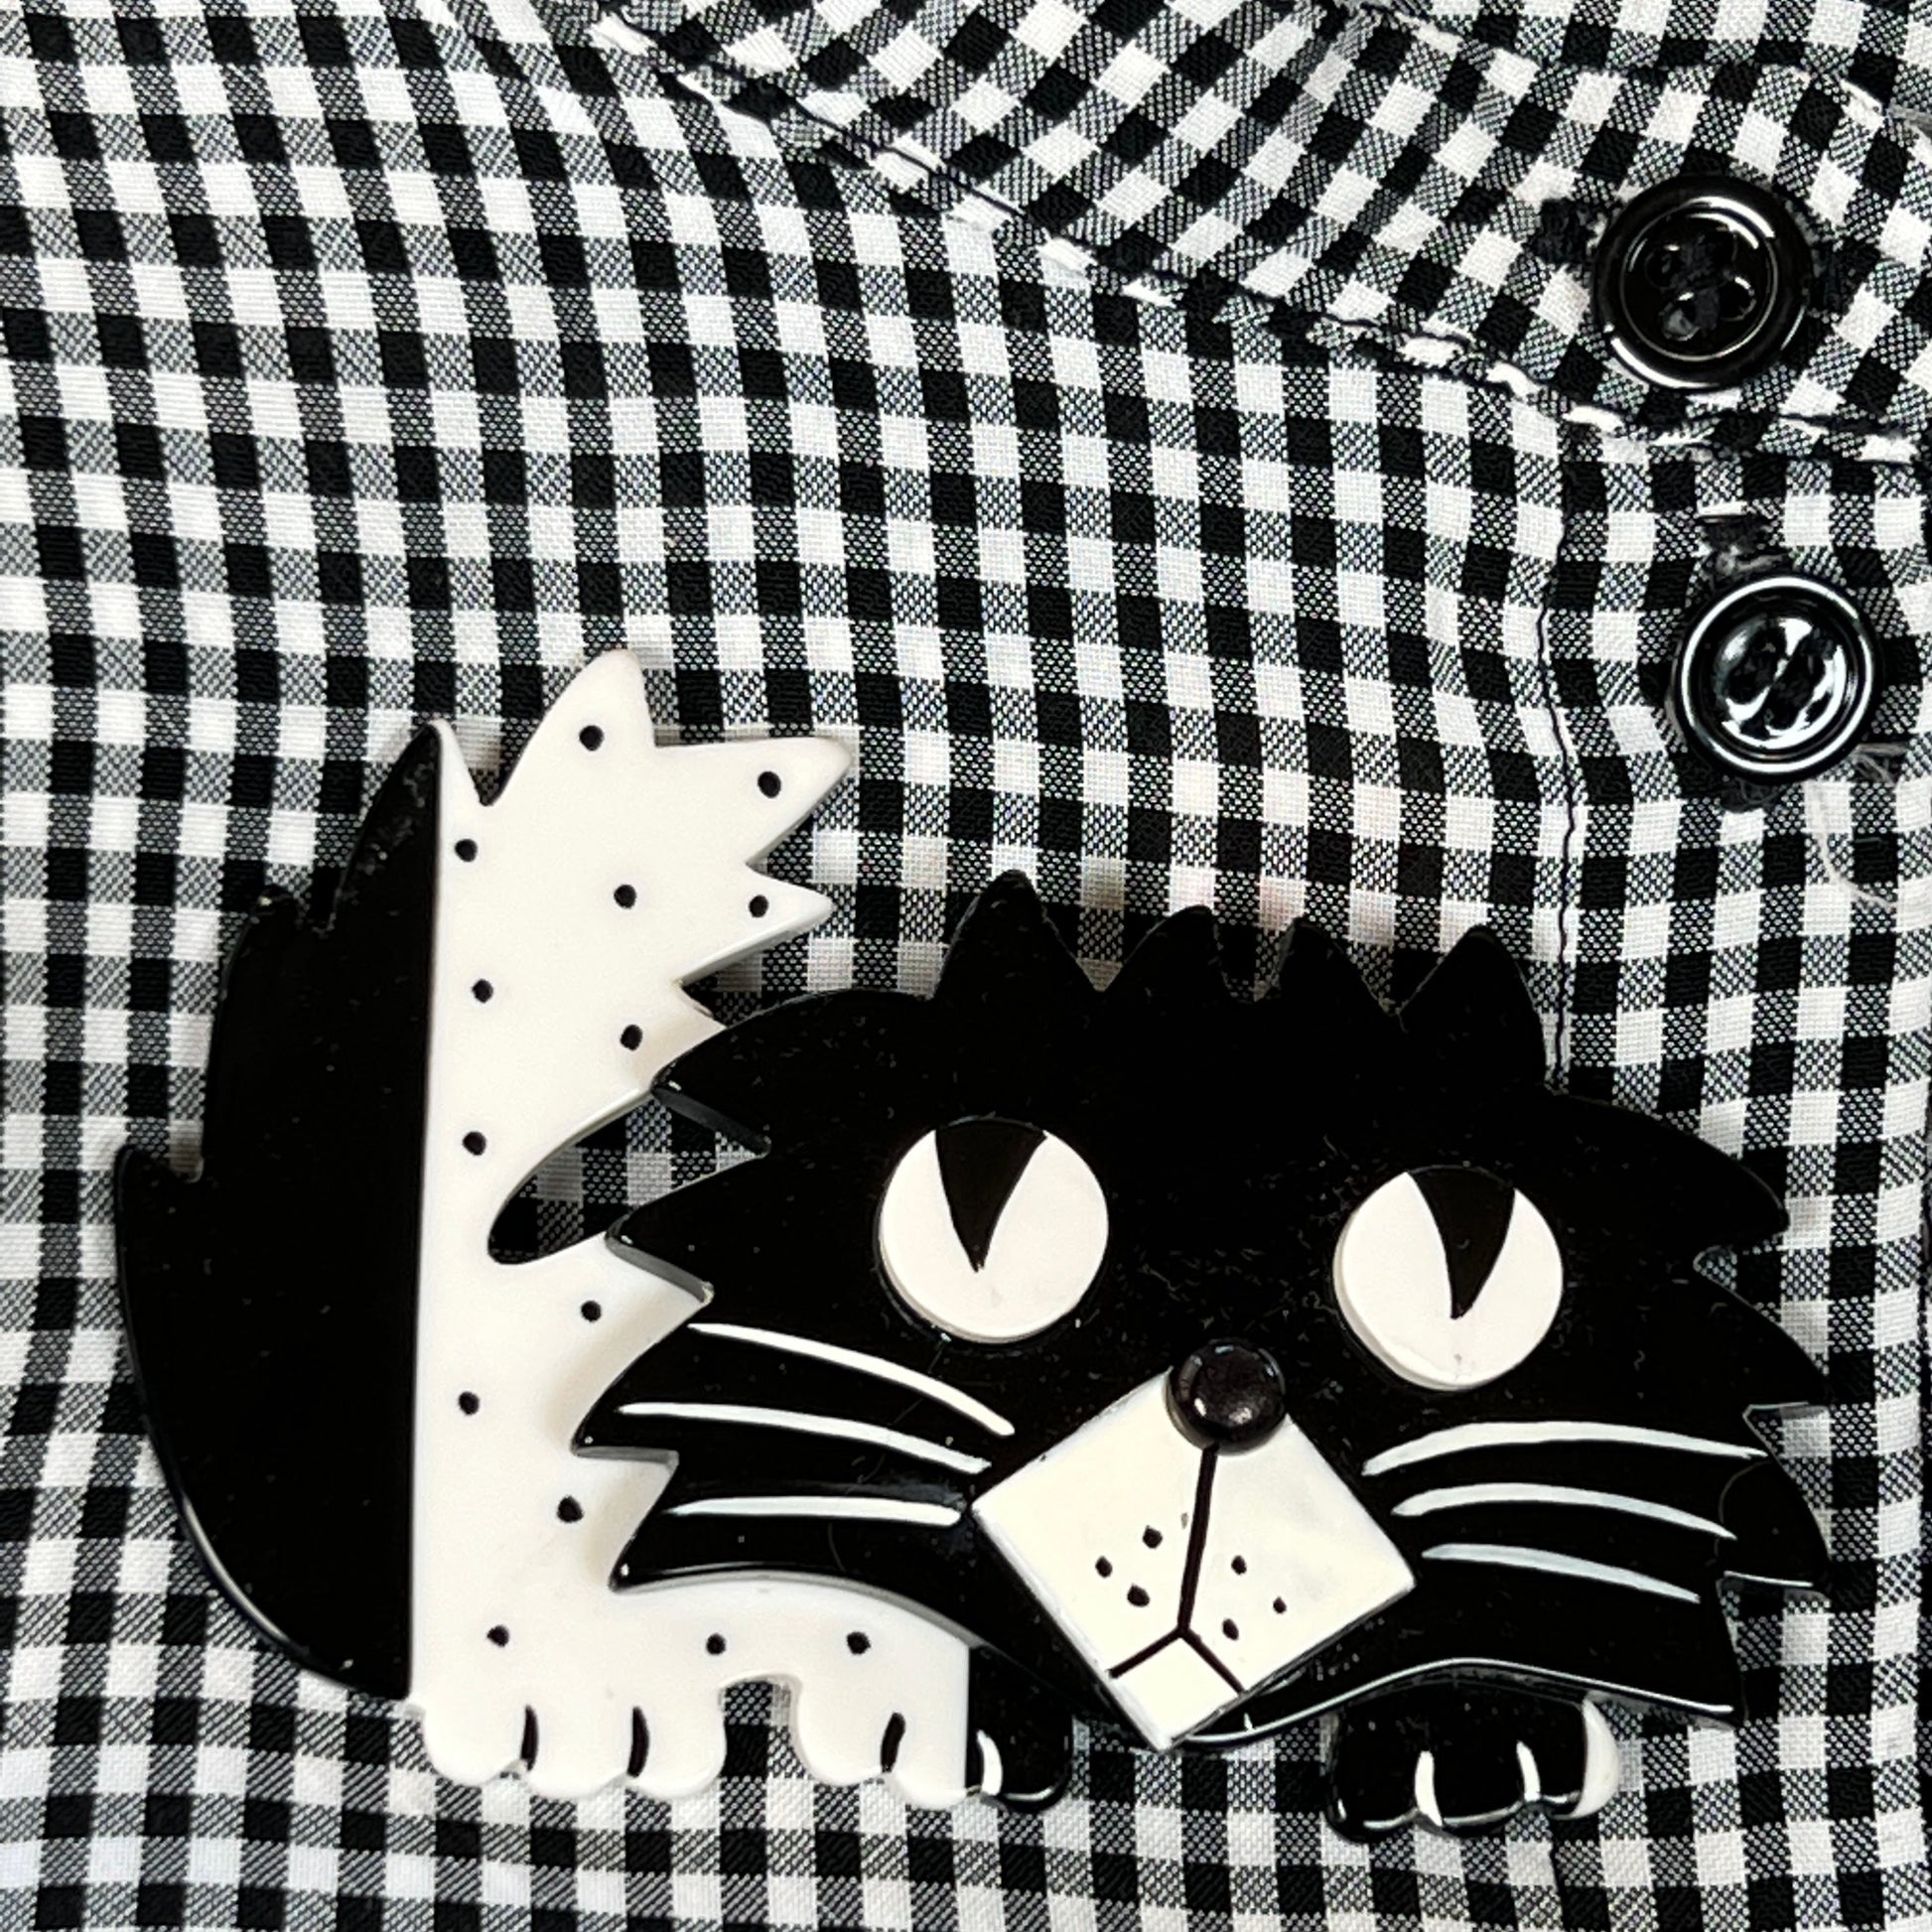 Black and White Rocky Cat Brooch